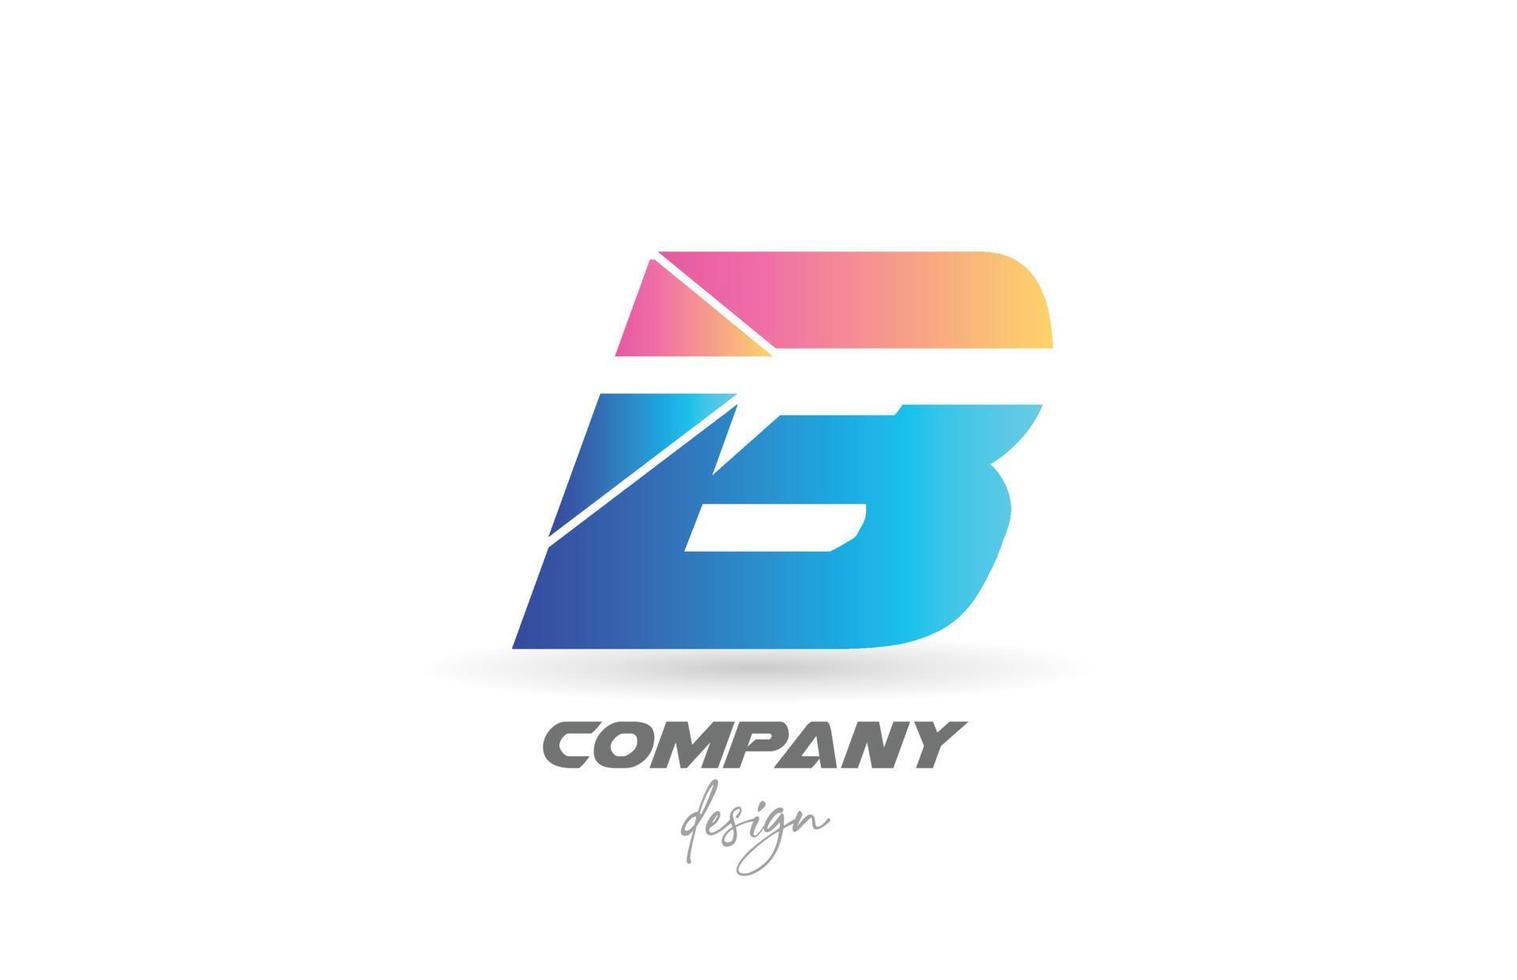 Colorful B alphabet letter logo icon with sliced design and blue pink colors. Creative template for business and company vector